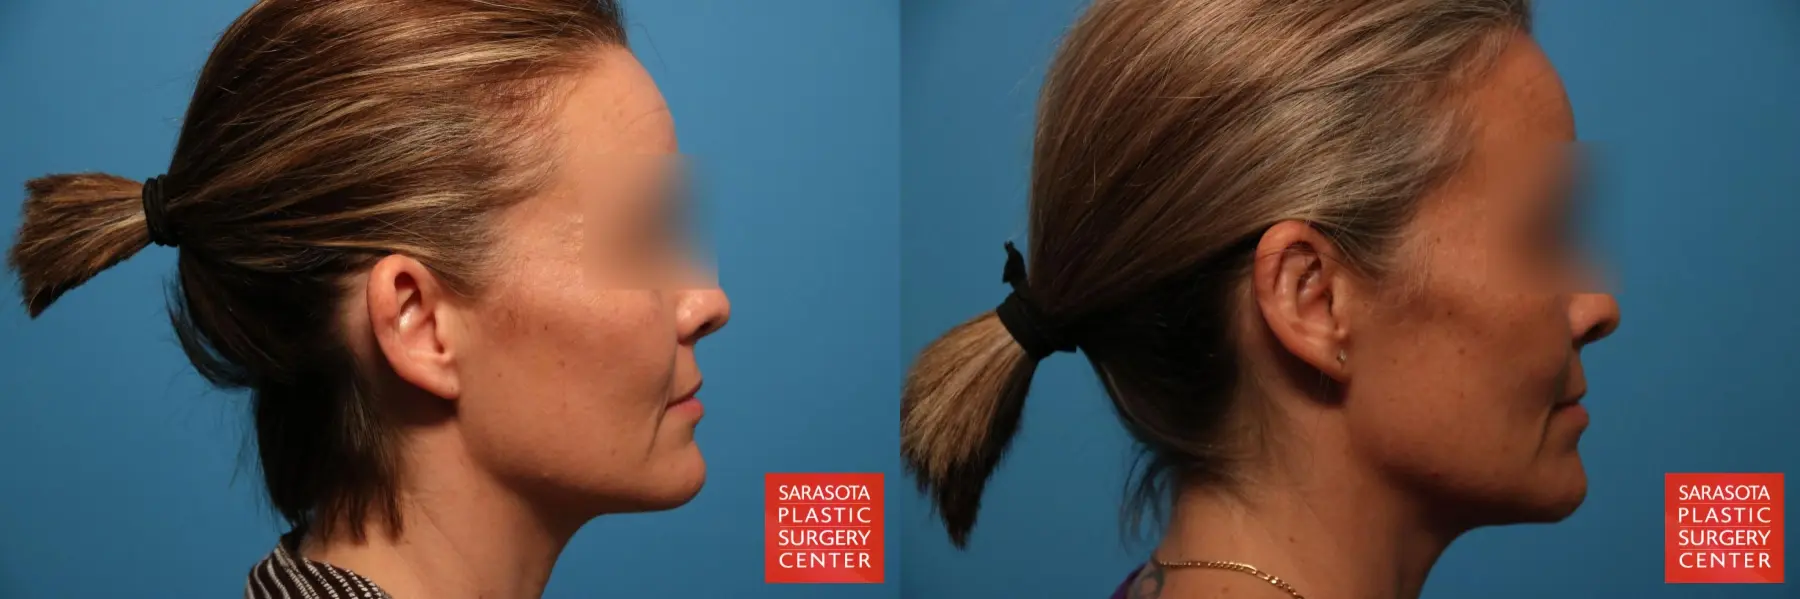 Otoplasty And Earlobe Repair: Patient 1 - Before and After 4